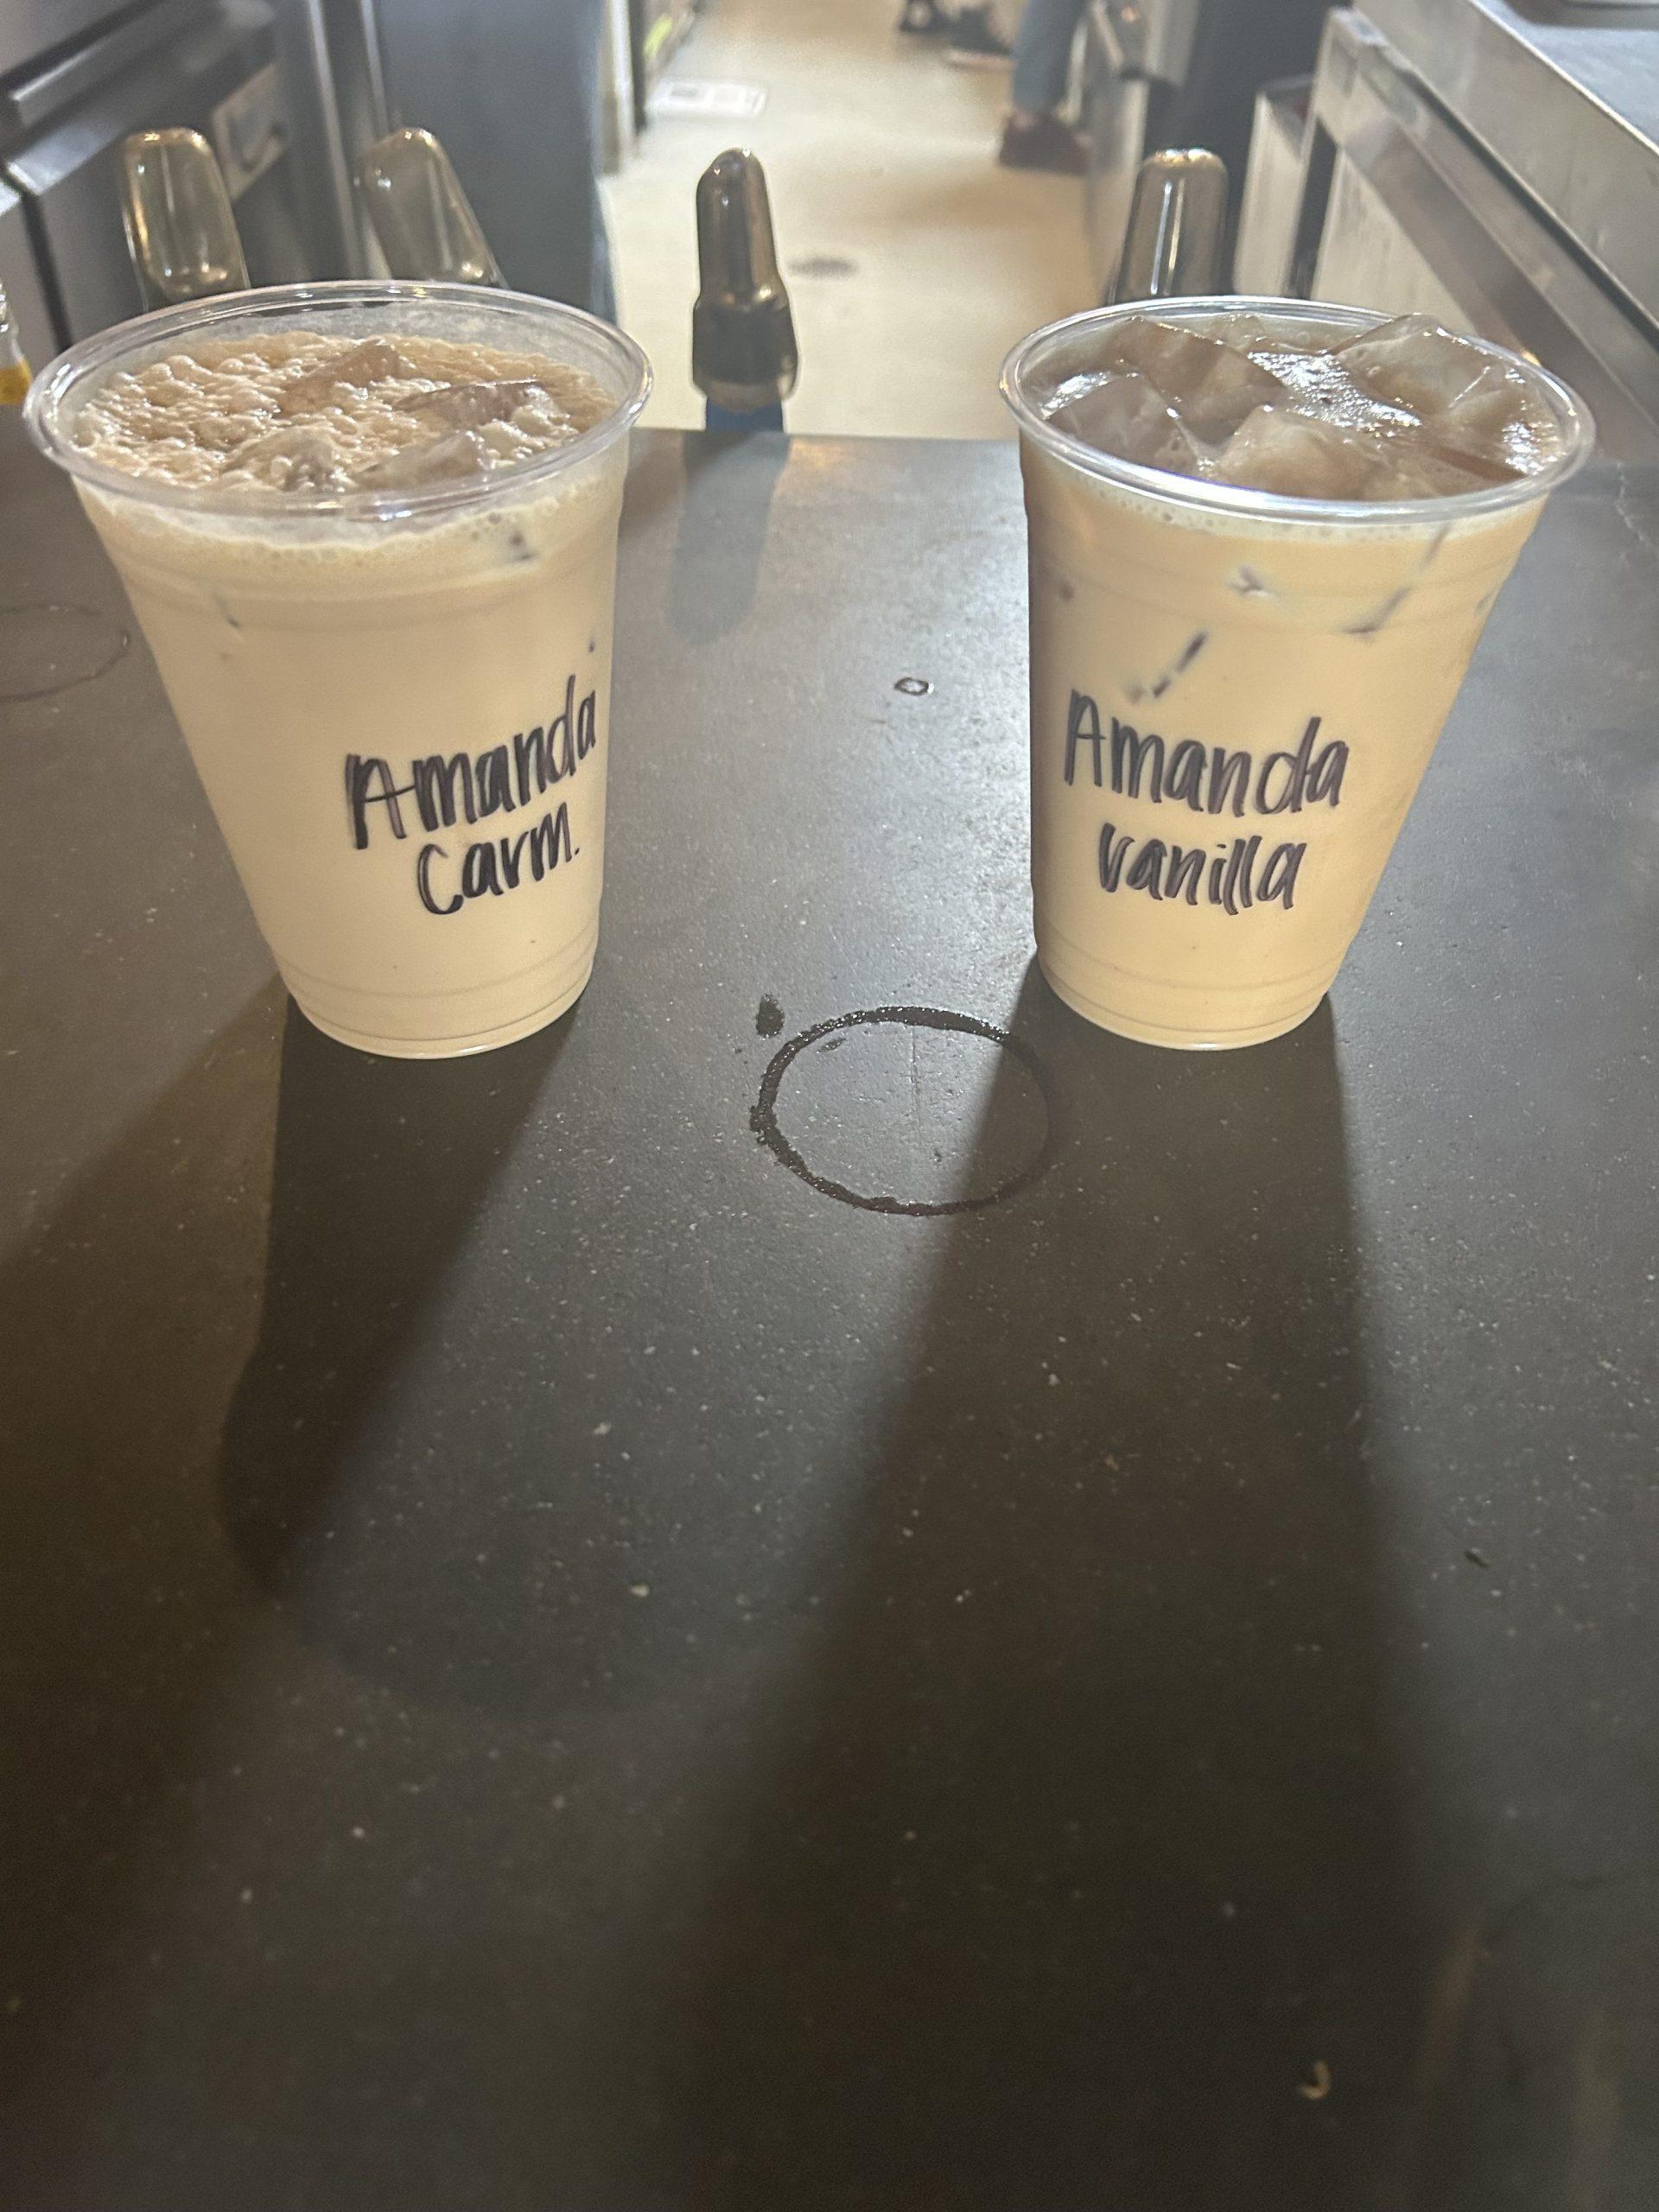 The Amandas&squot; coffees, which say "Amanda caramel" and "Amanda vanilla," sit on a coffee shop counter in Santa Barbara, California, on Sept. 23. This was one of many times baristas got creative with differentiating the same-named orders.